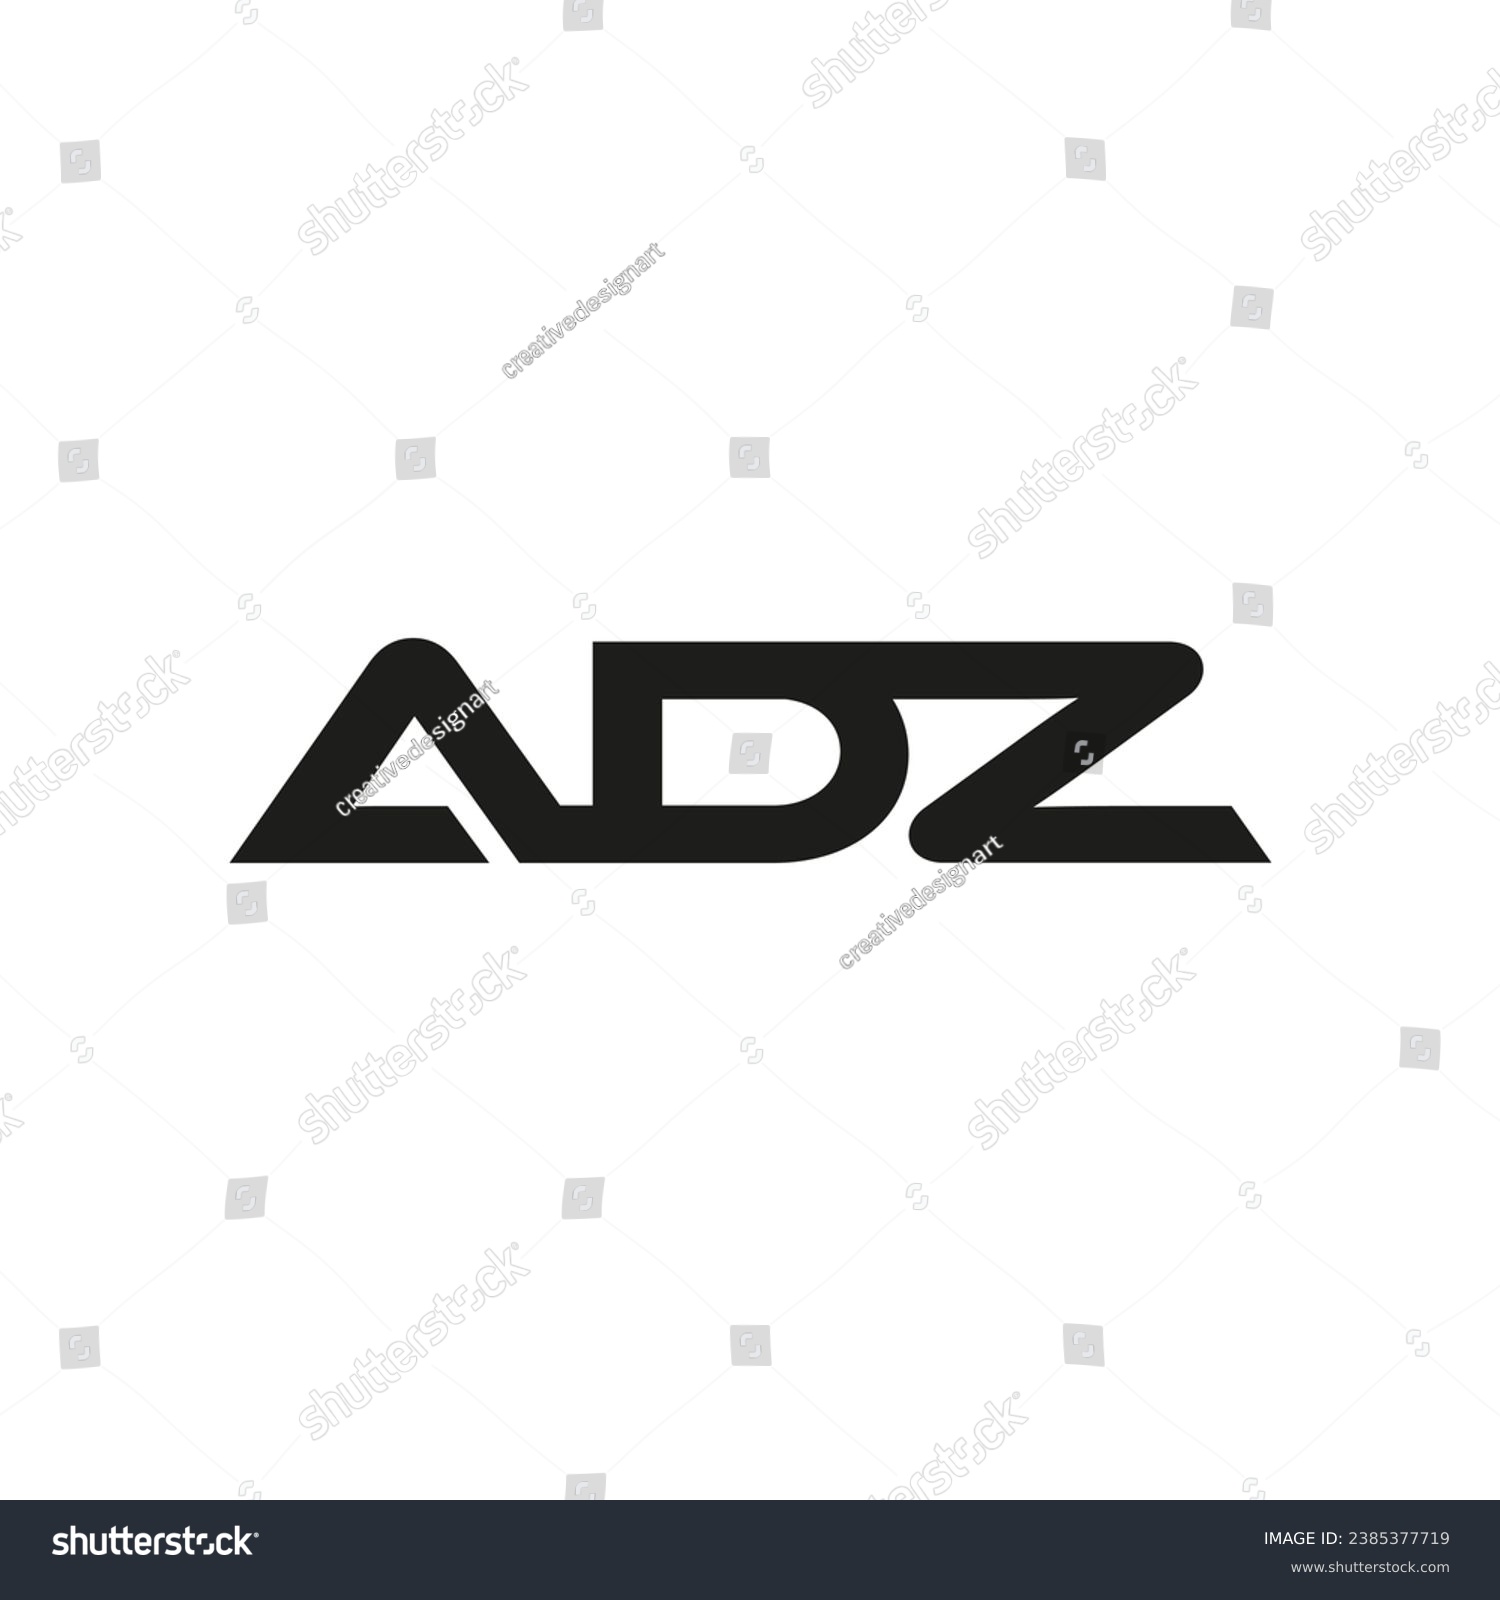 SVG of ADZ A D Z Letter Logo Design with Creative Trendy Typography and Black Colors svg